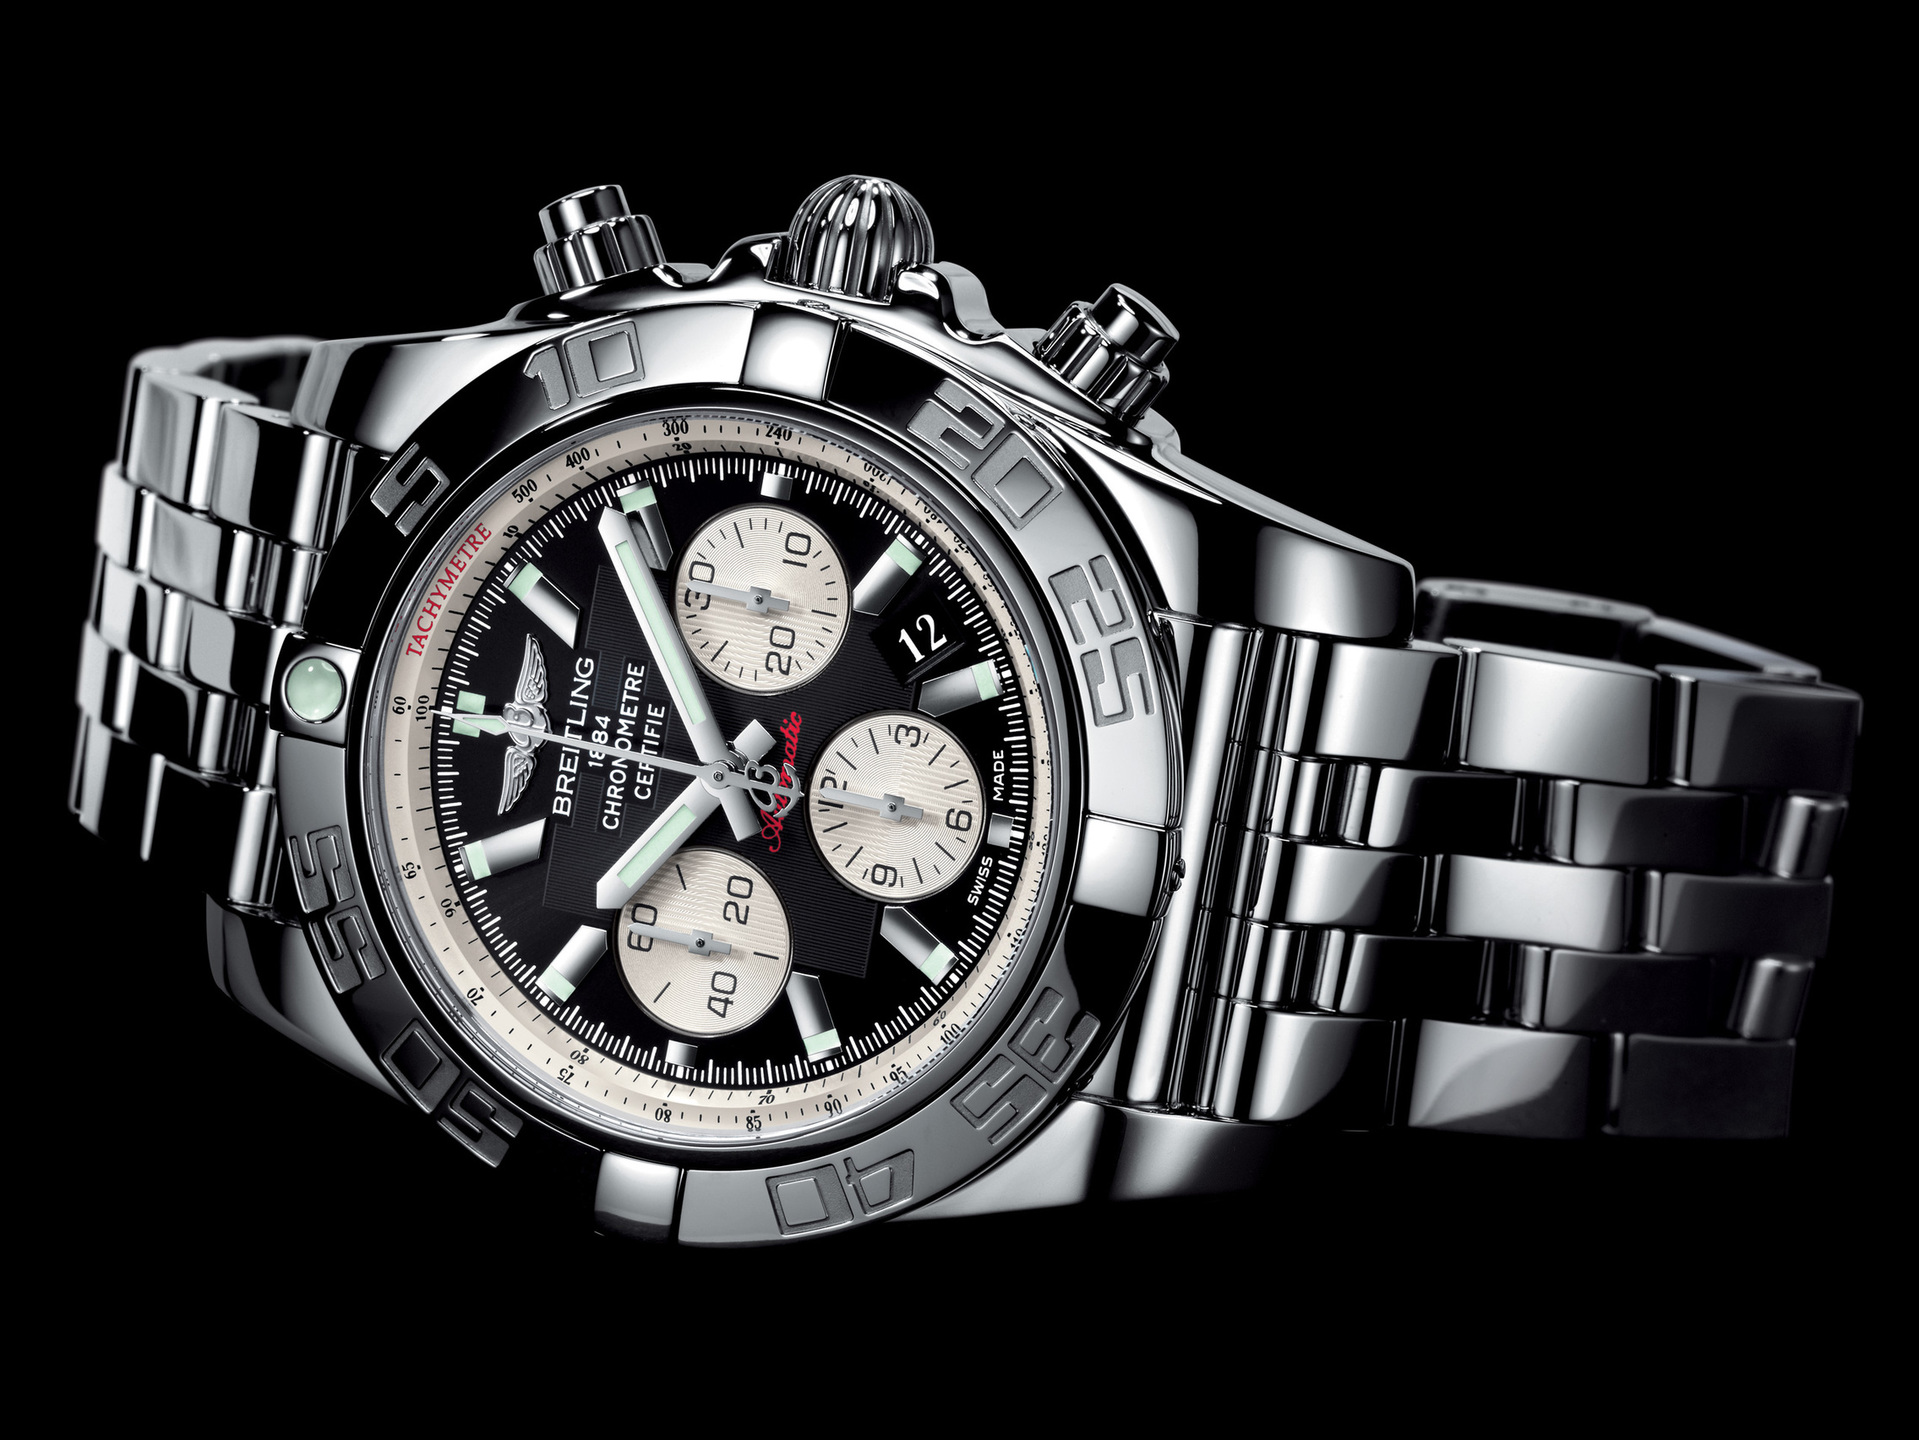 The breitling timer evolved grey dial-up steelman to watch the A13356 box of paper